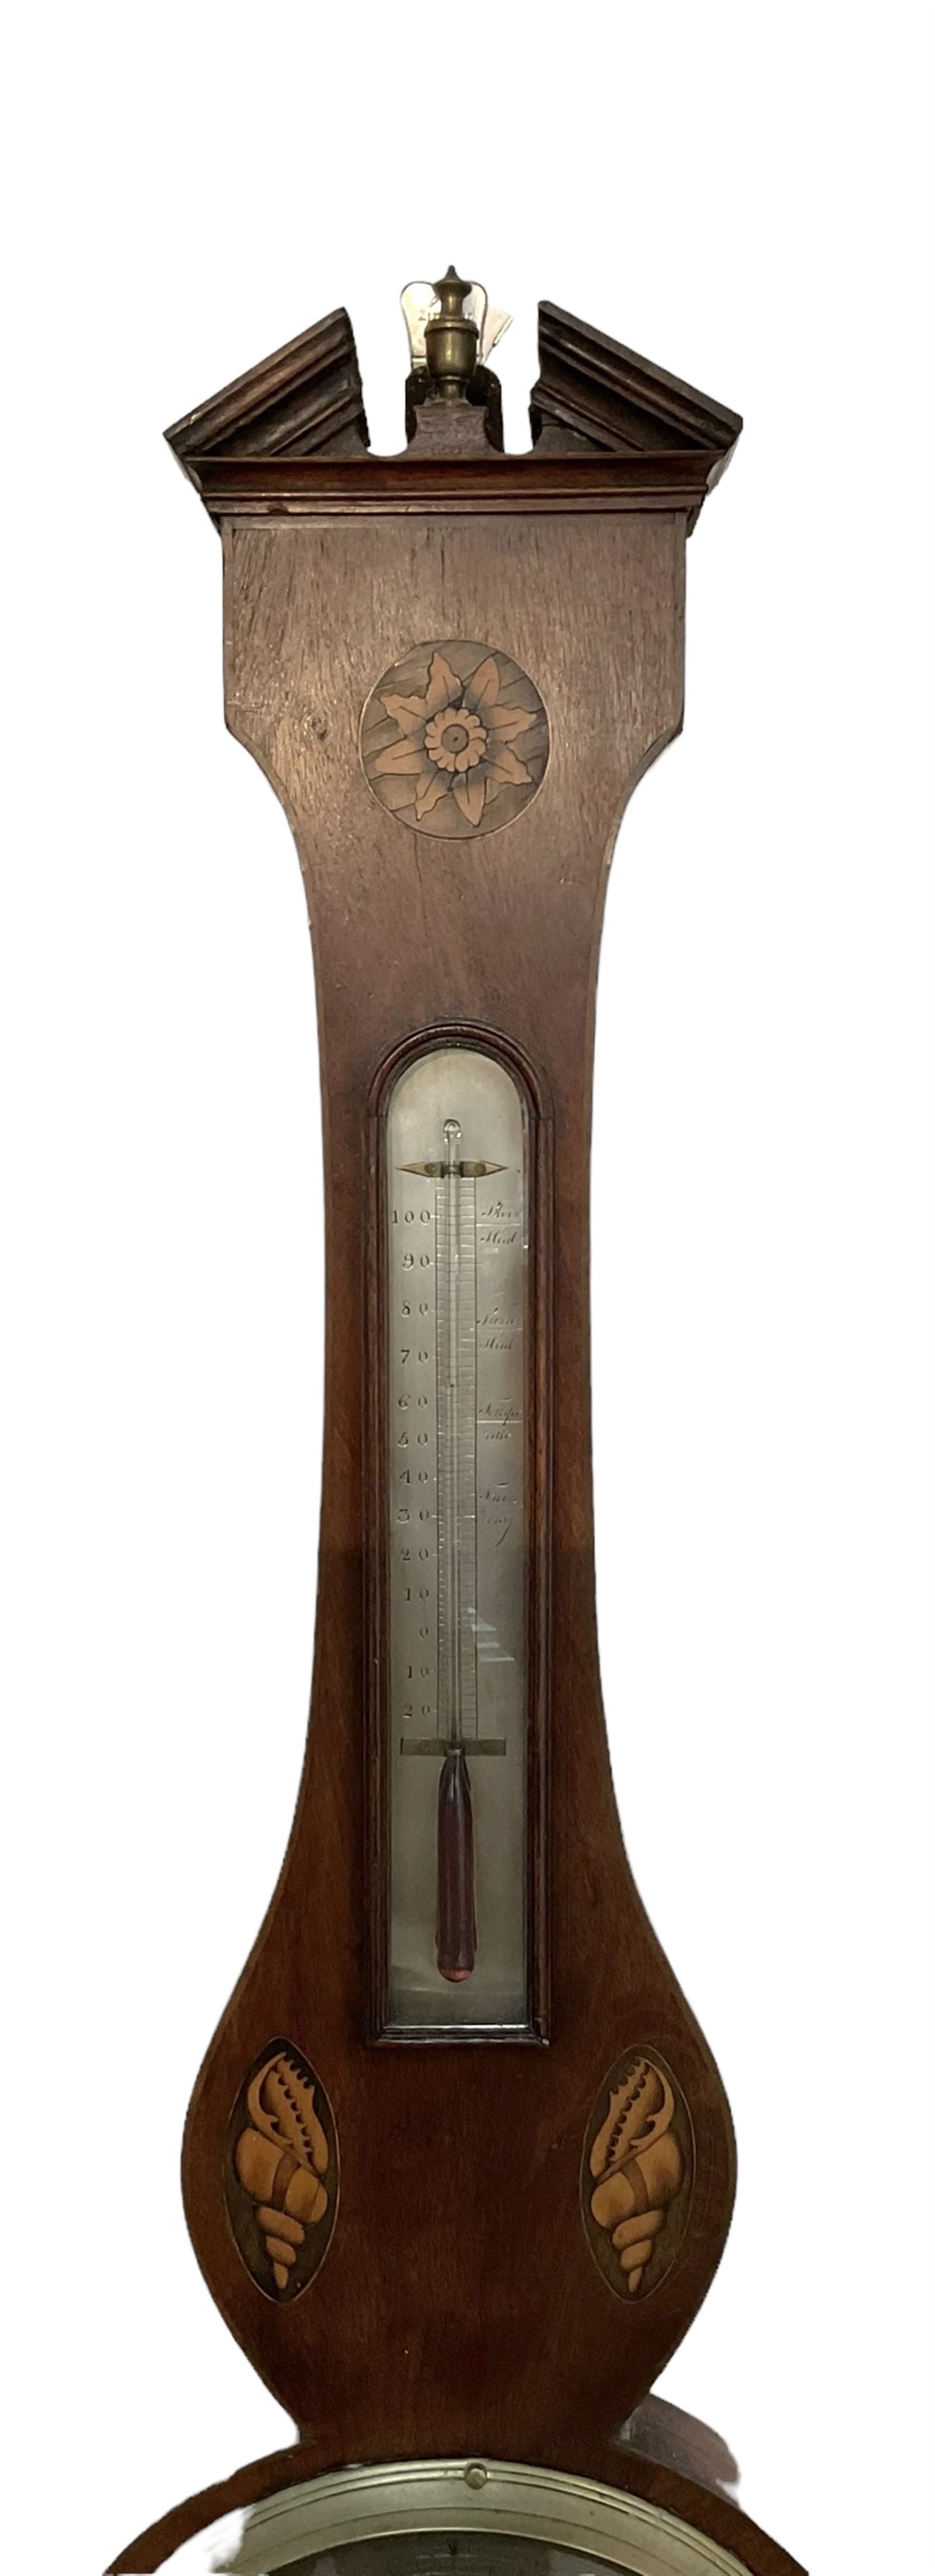 Early 19th century - Inlaid mahogany Sheraton mercury barometer with a silvered register and spirit - Image 3 of 3